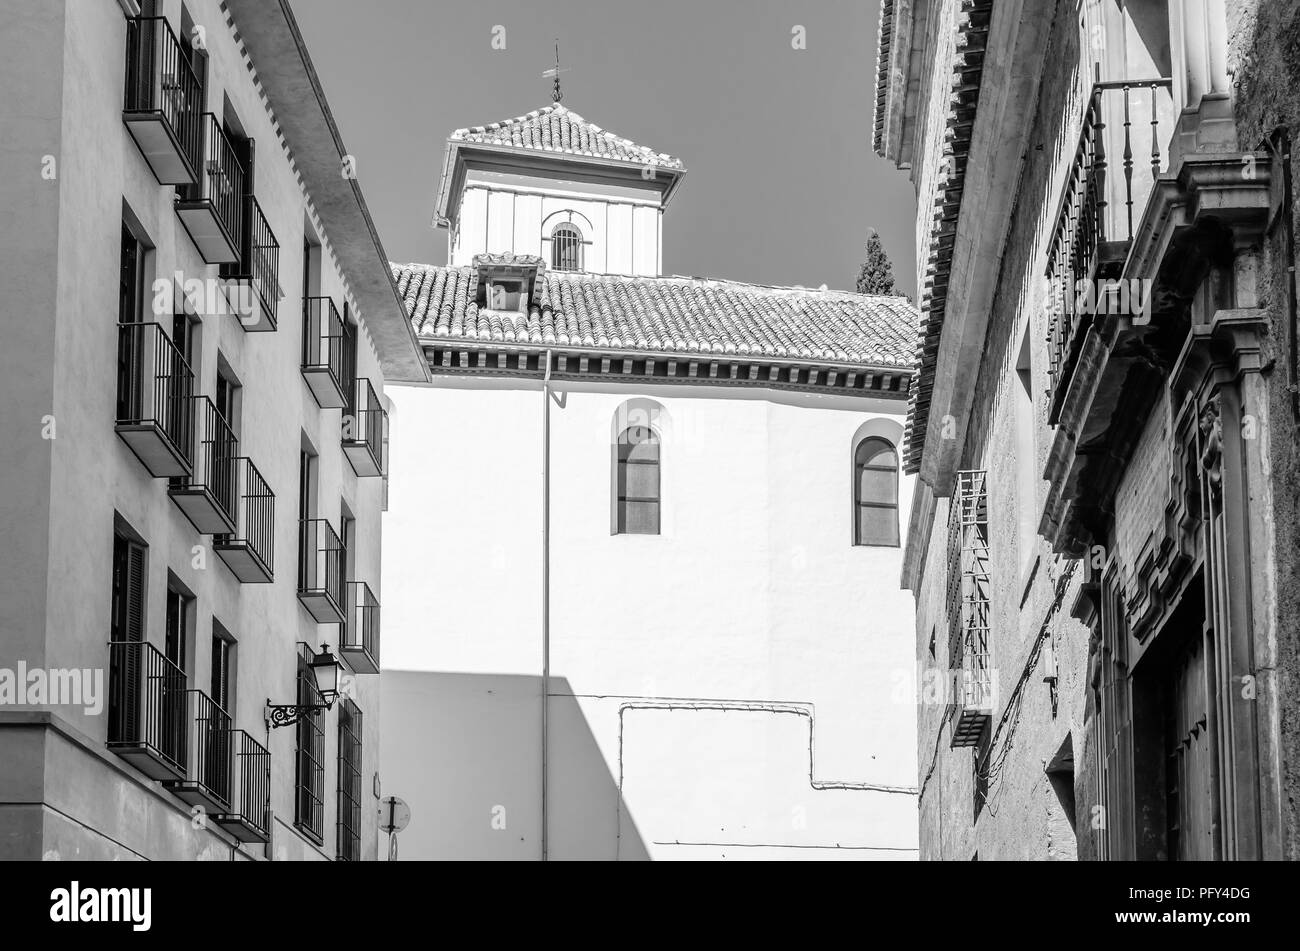 Church in Granada, Andalusia, southern Spain, black and white image Stock Photo